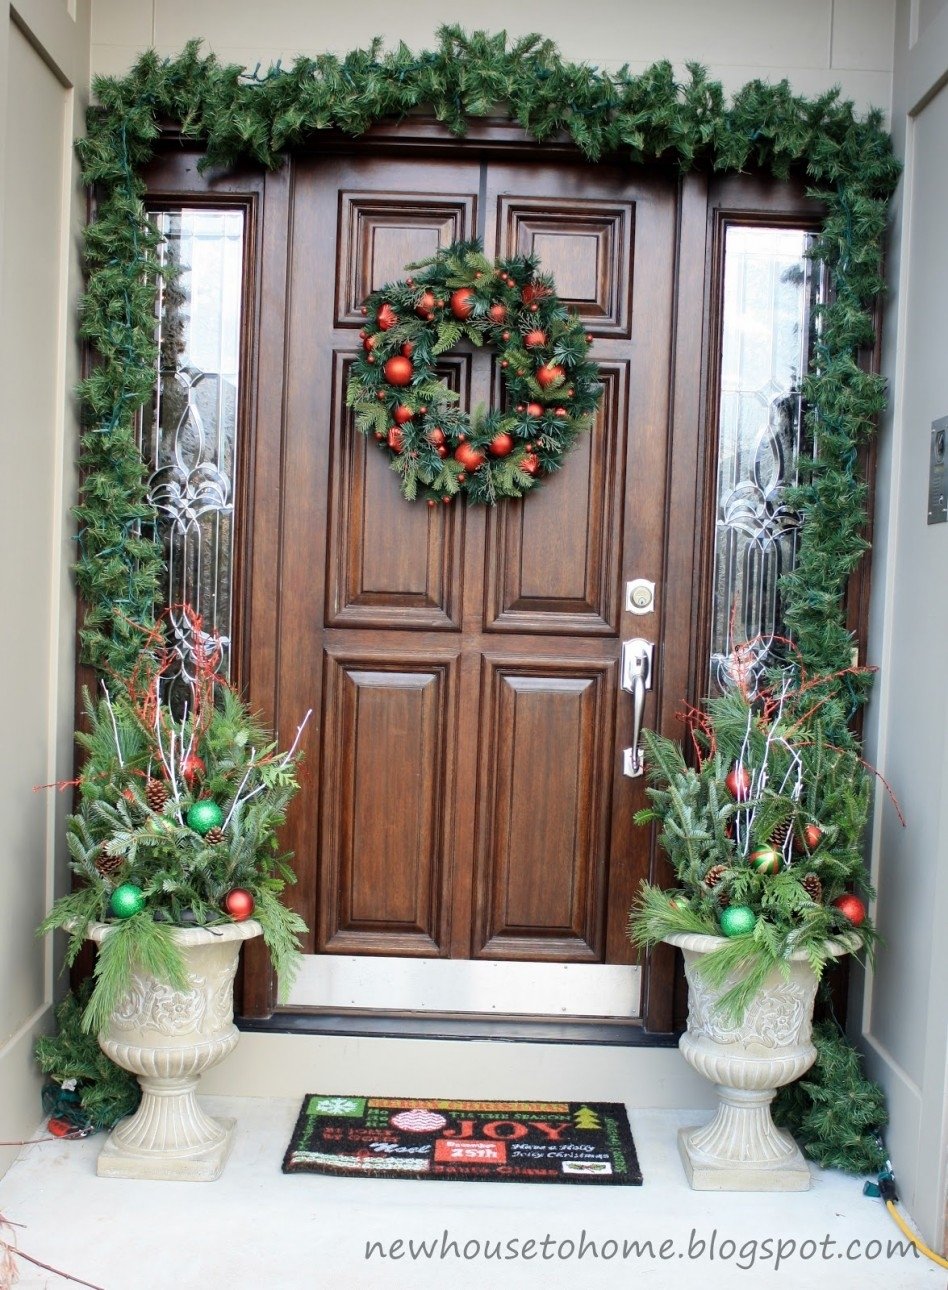 10 Spectacular Front Door Christmas Decorations Ideas decorating ideas kiler front porch christmas design ideas with 2023